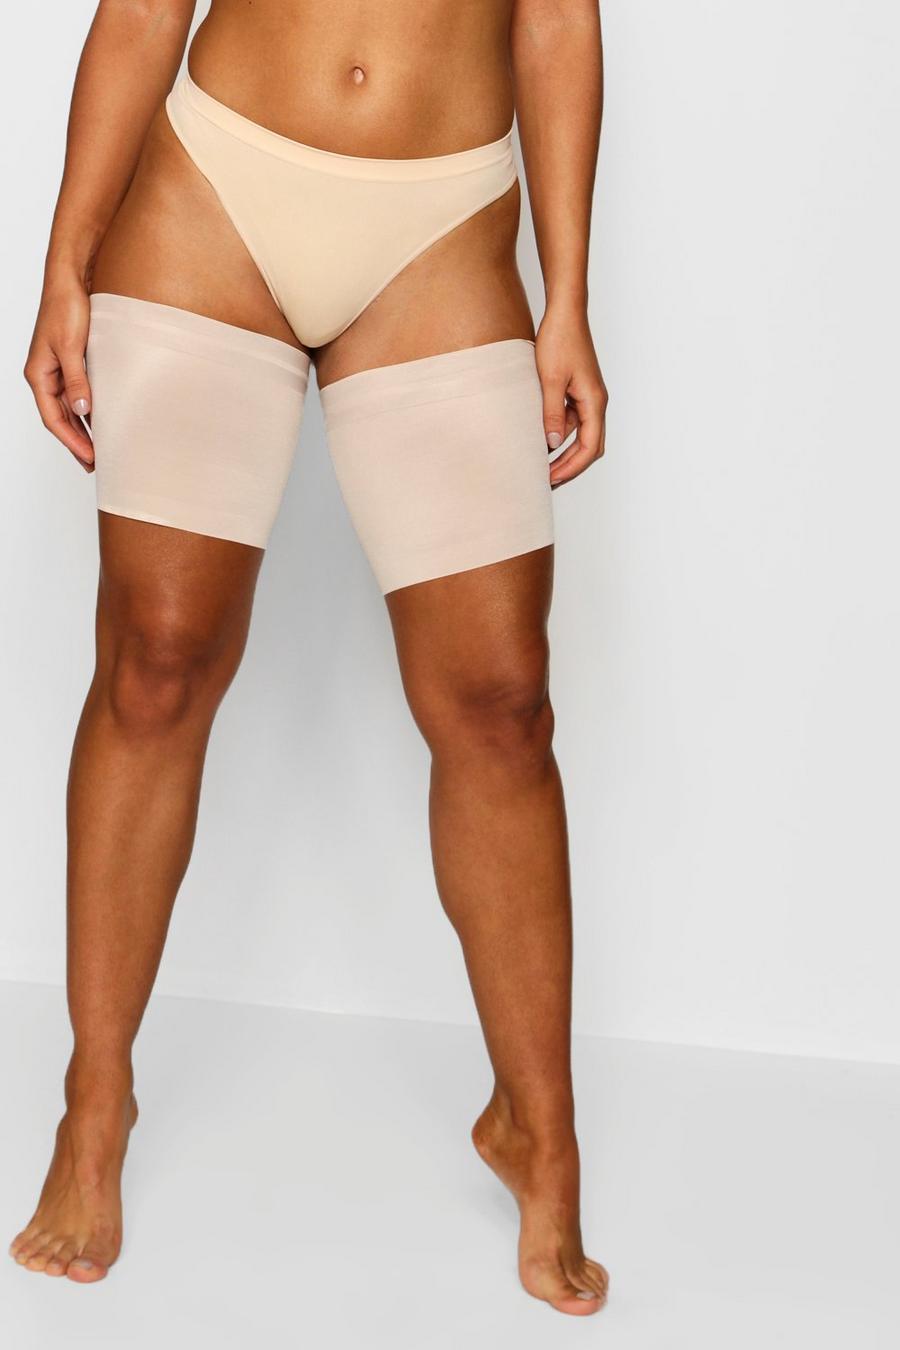 Nude Anti Chafing Thigh Band